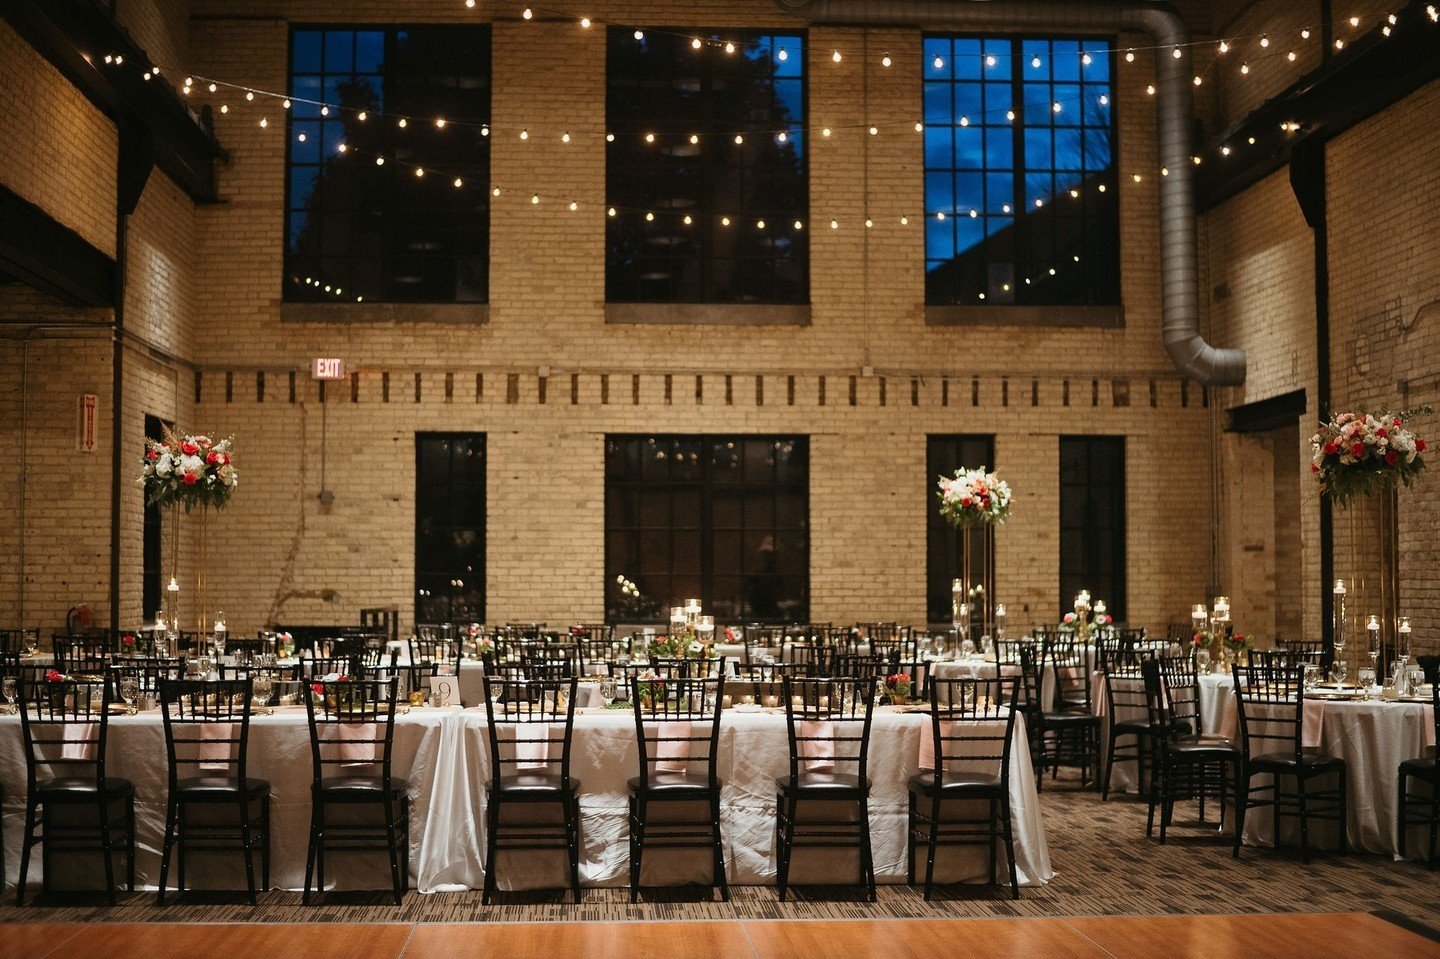 Entrust your dream wedding to us, your dedicated Grand Rapids wedding planner. We're passionate about curating unforgettable moments against the backdrop of our beloved city. From intimate celebrations to lively receptions in the heart of downtown, l